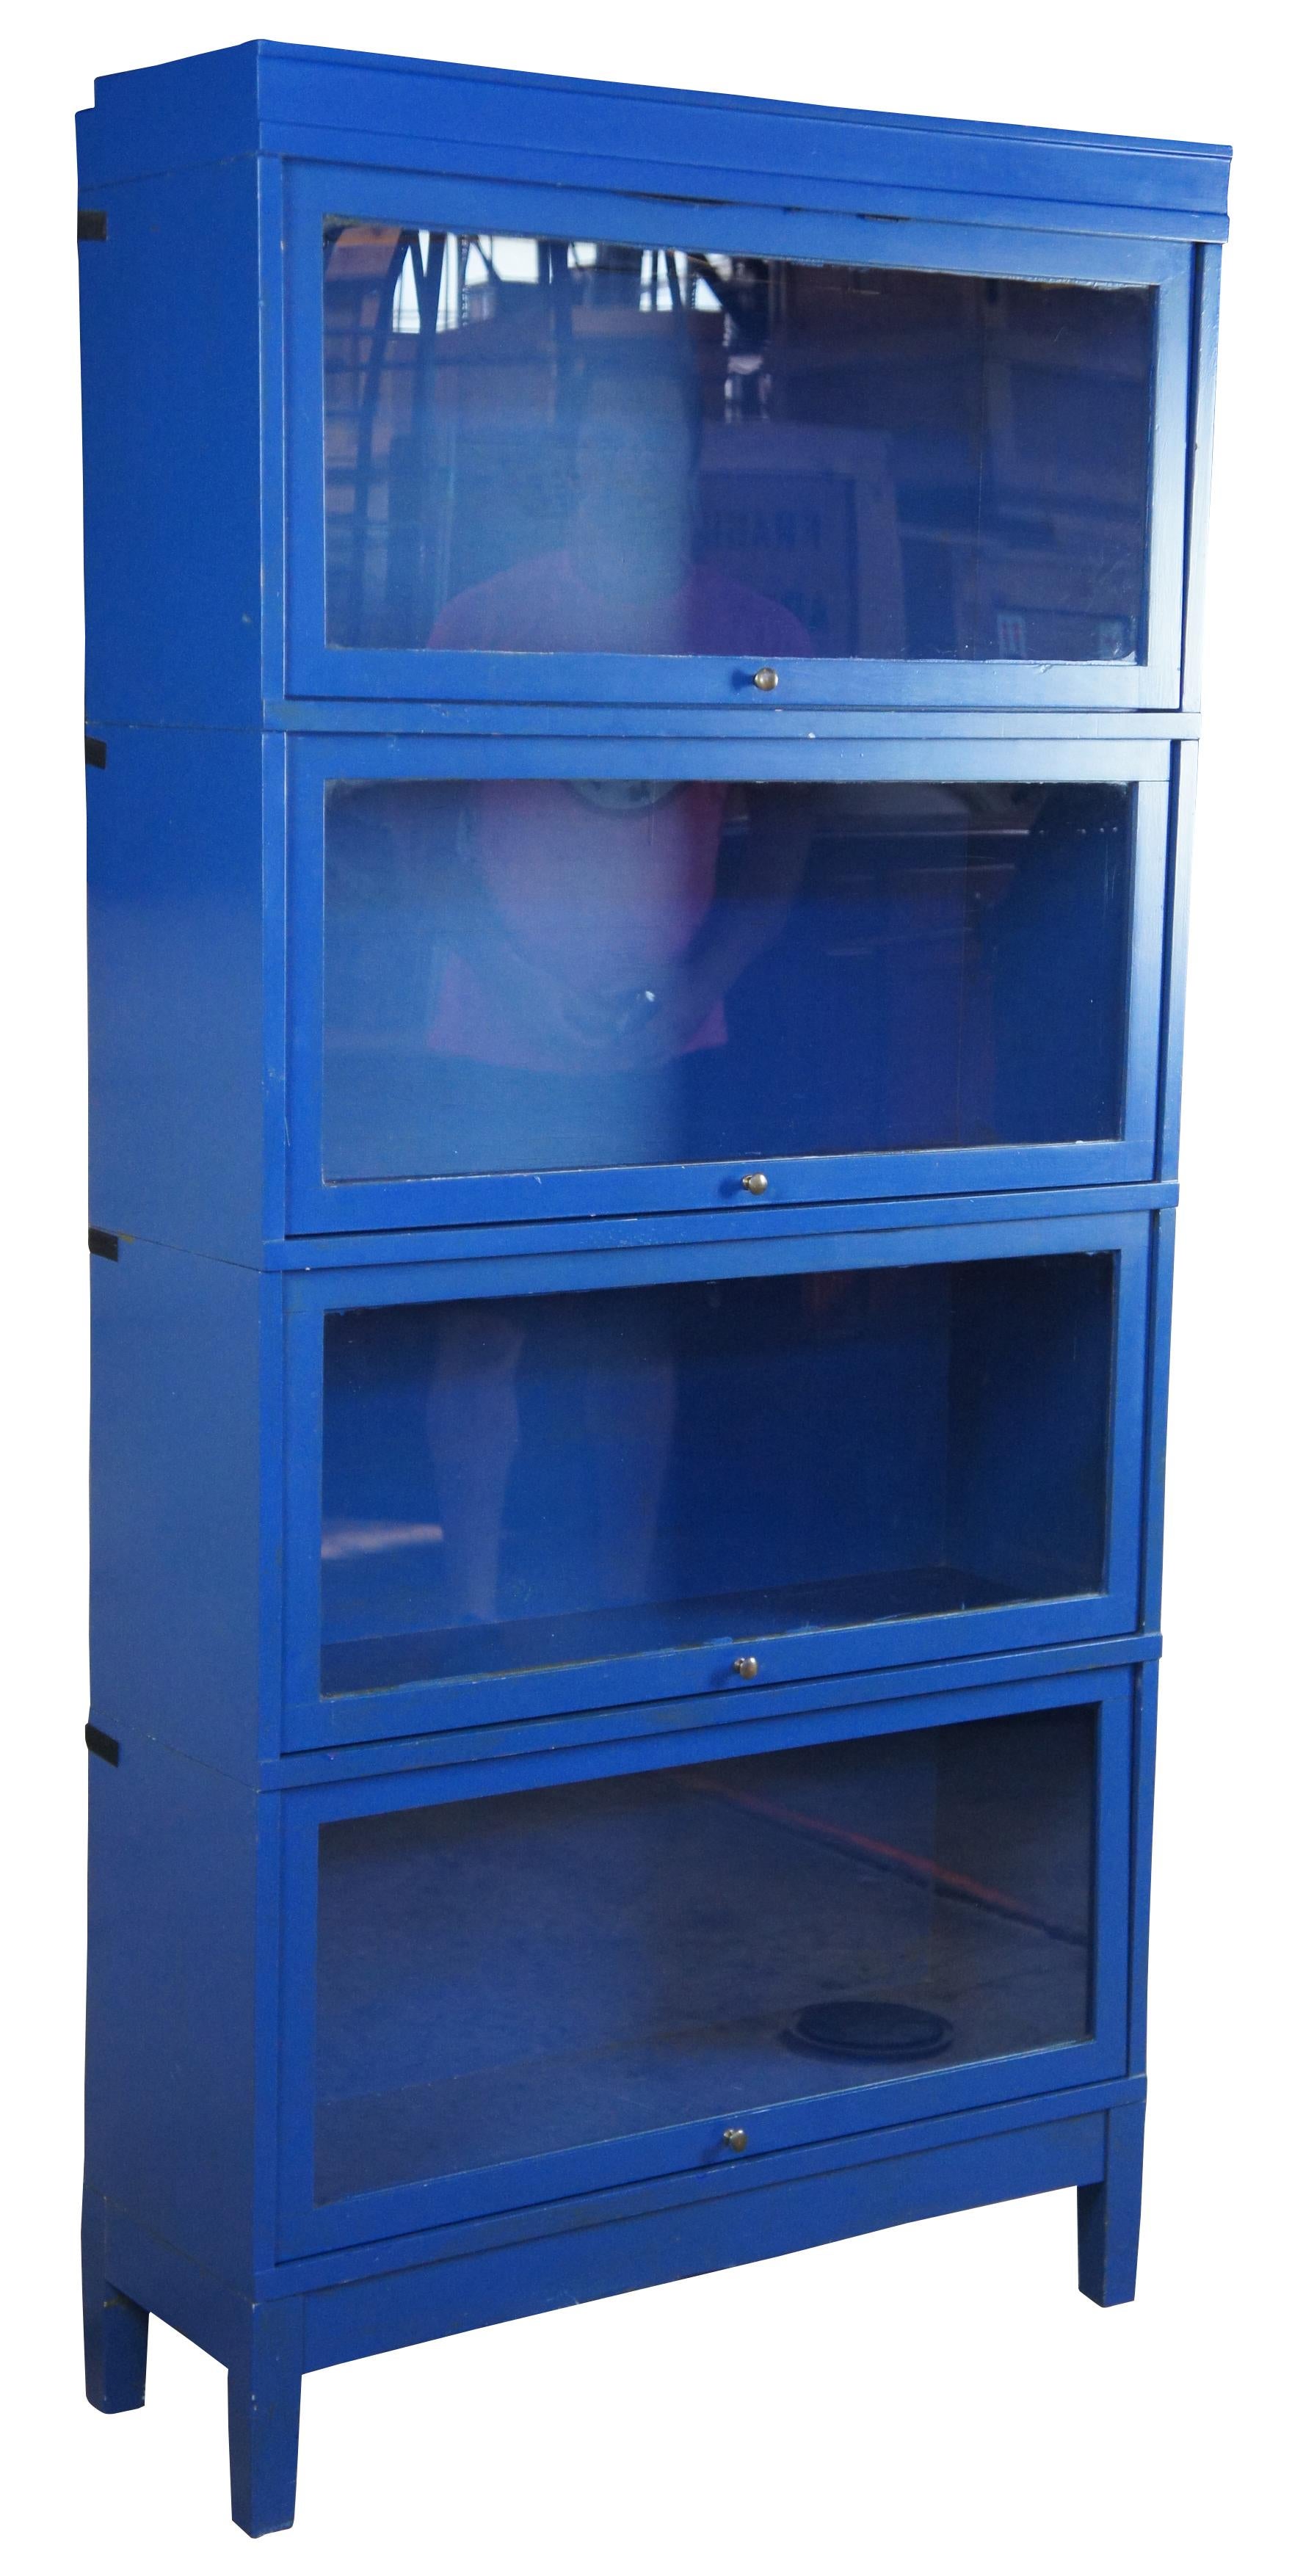 Modern painted blue library barrister bookcase. Features modular sections that stack. Made of wood and glass. Measure: 71